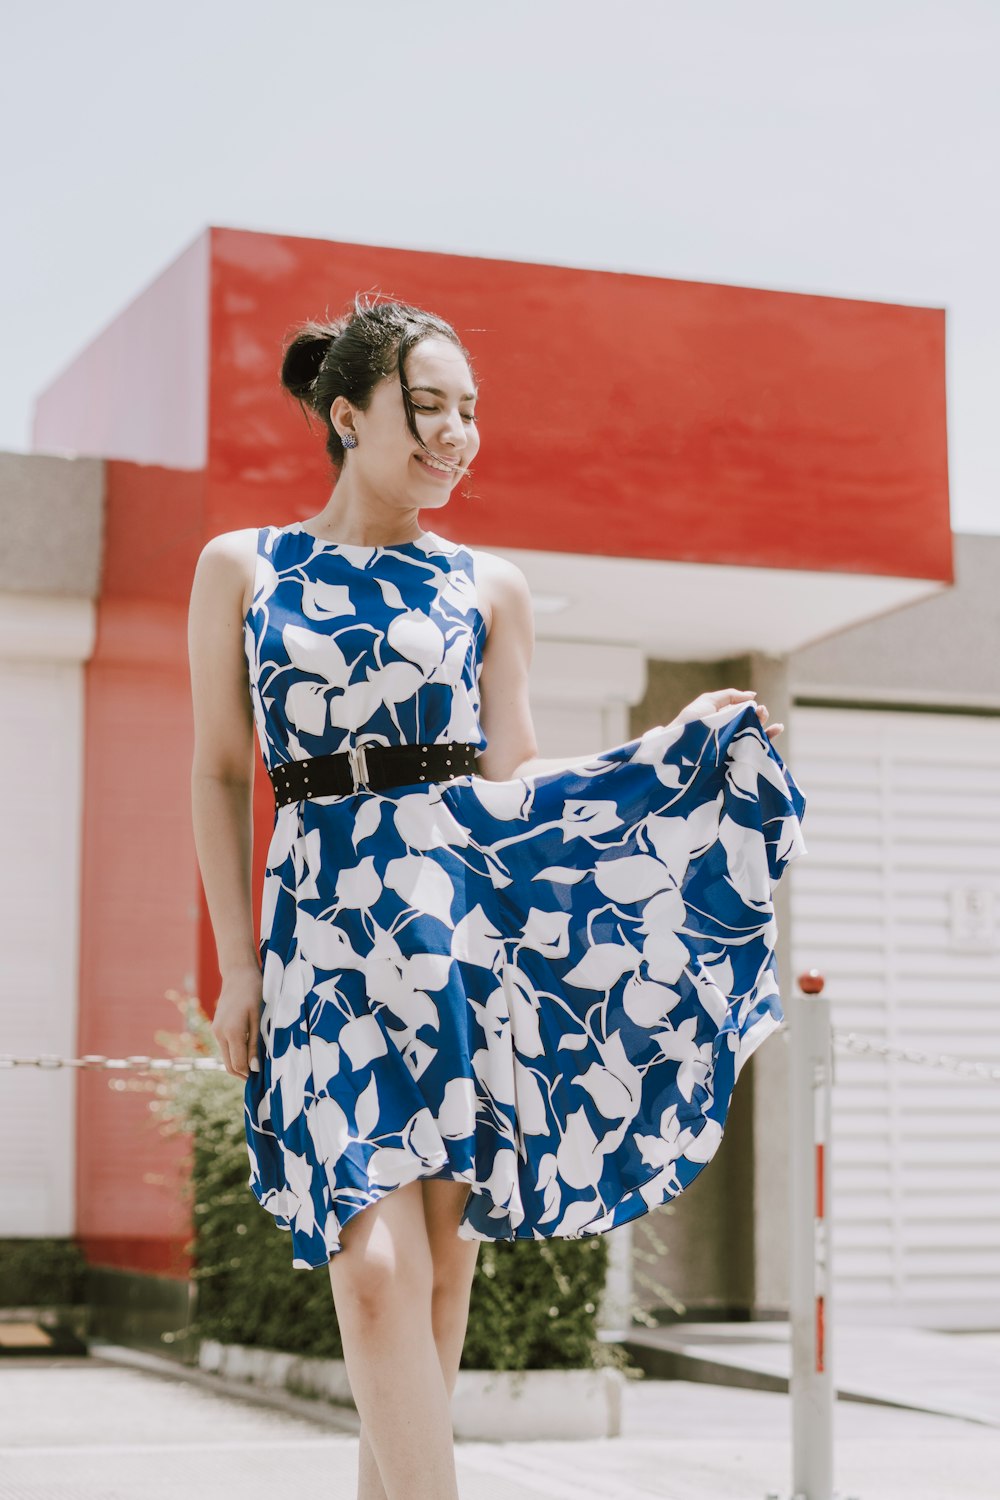 woman in blue and white floral spaghetti strap dress standing near red wall during daytime